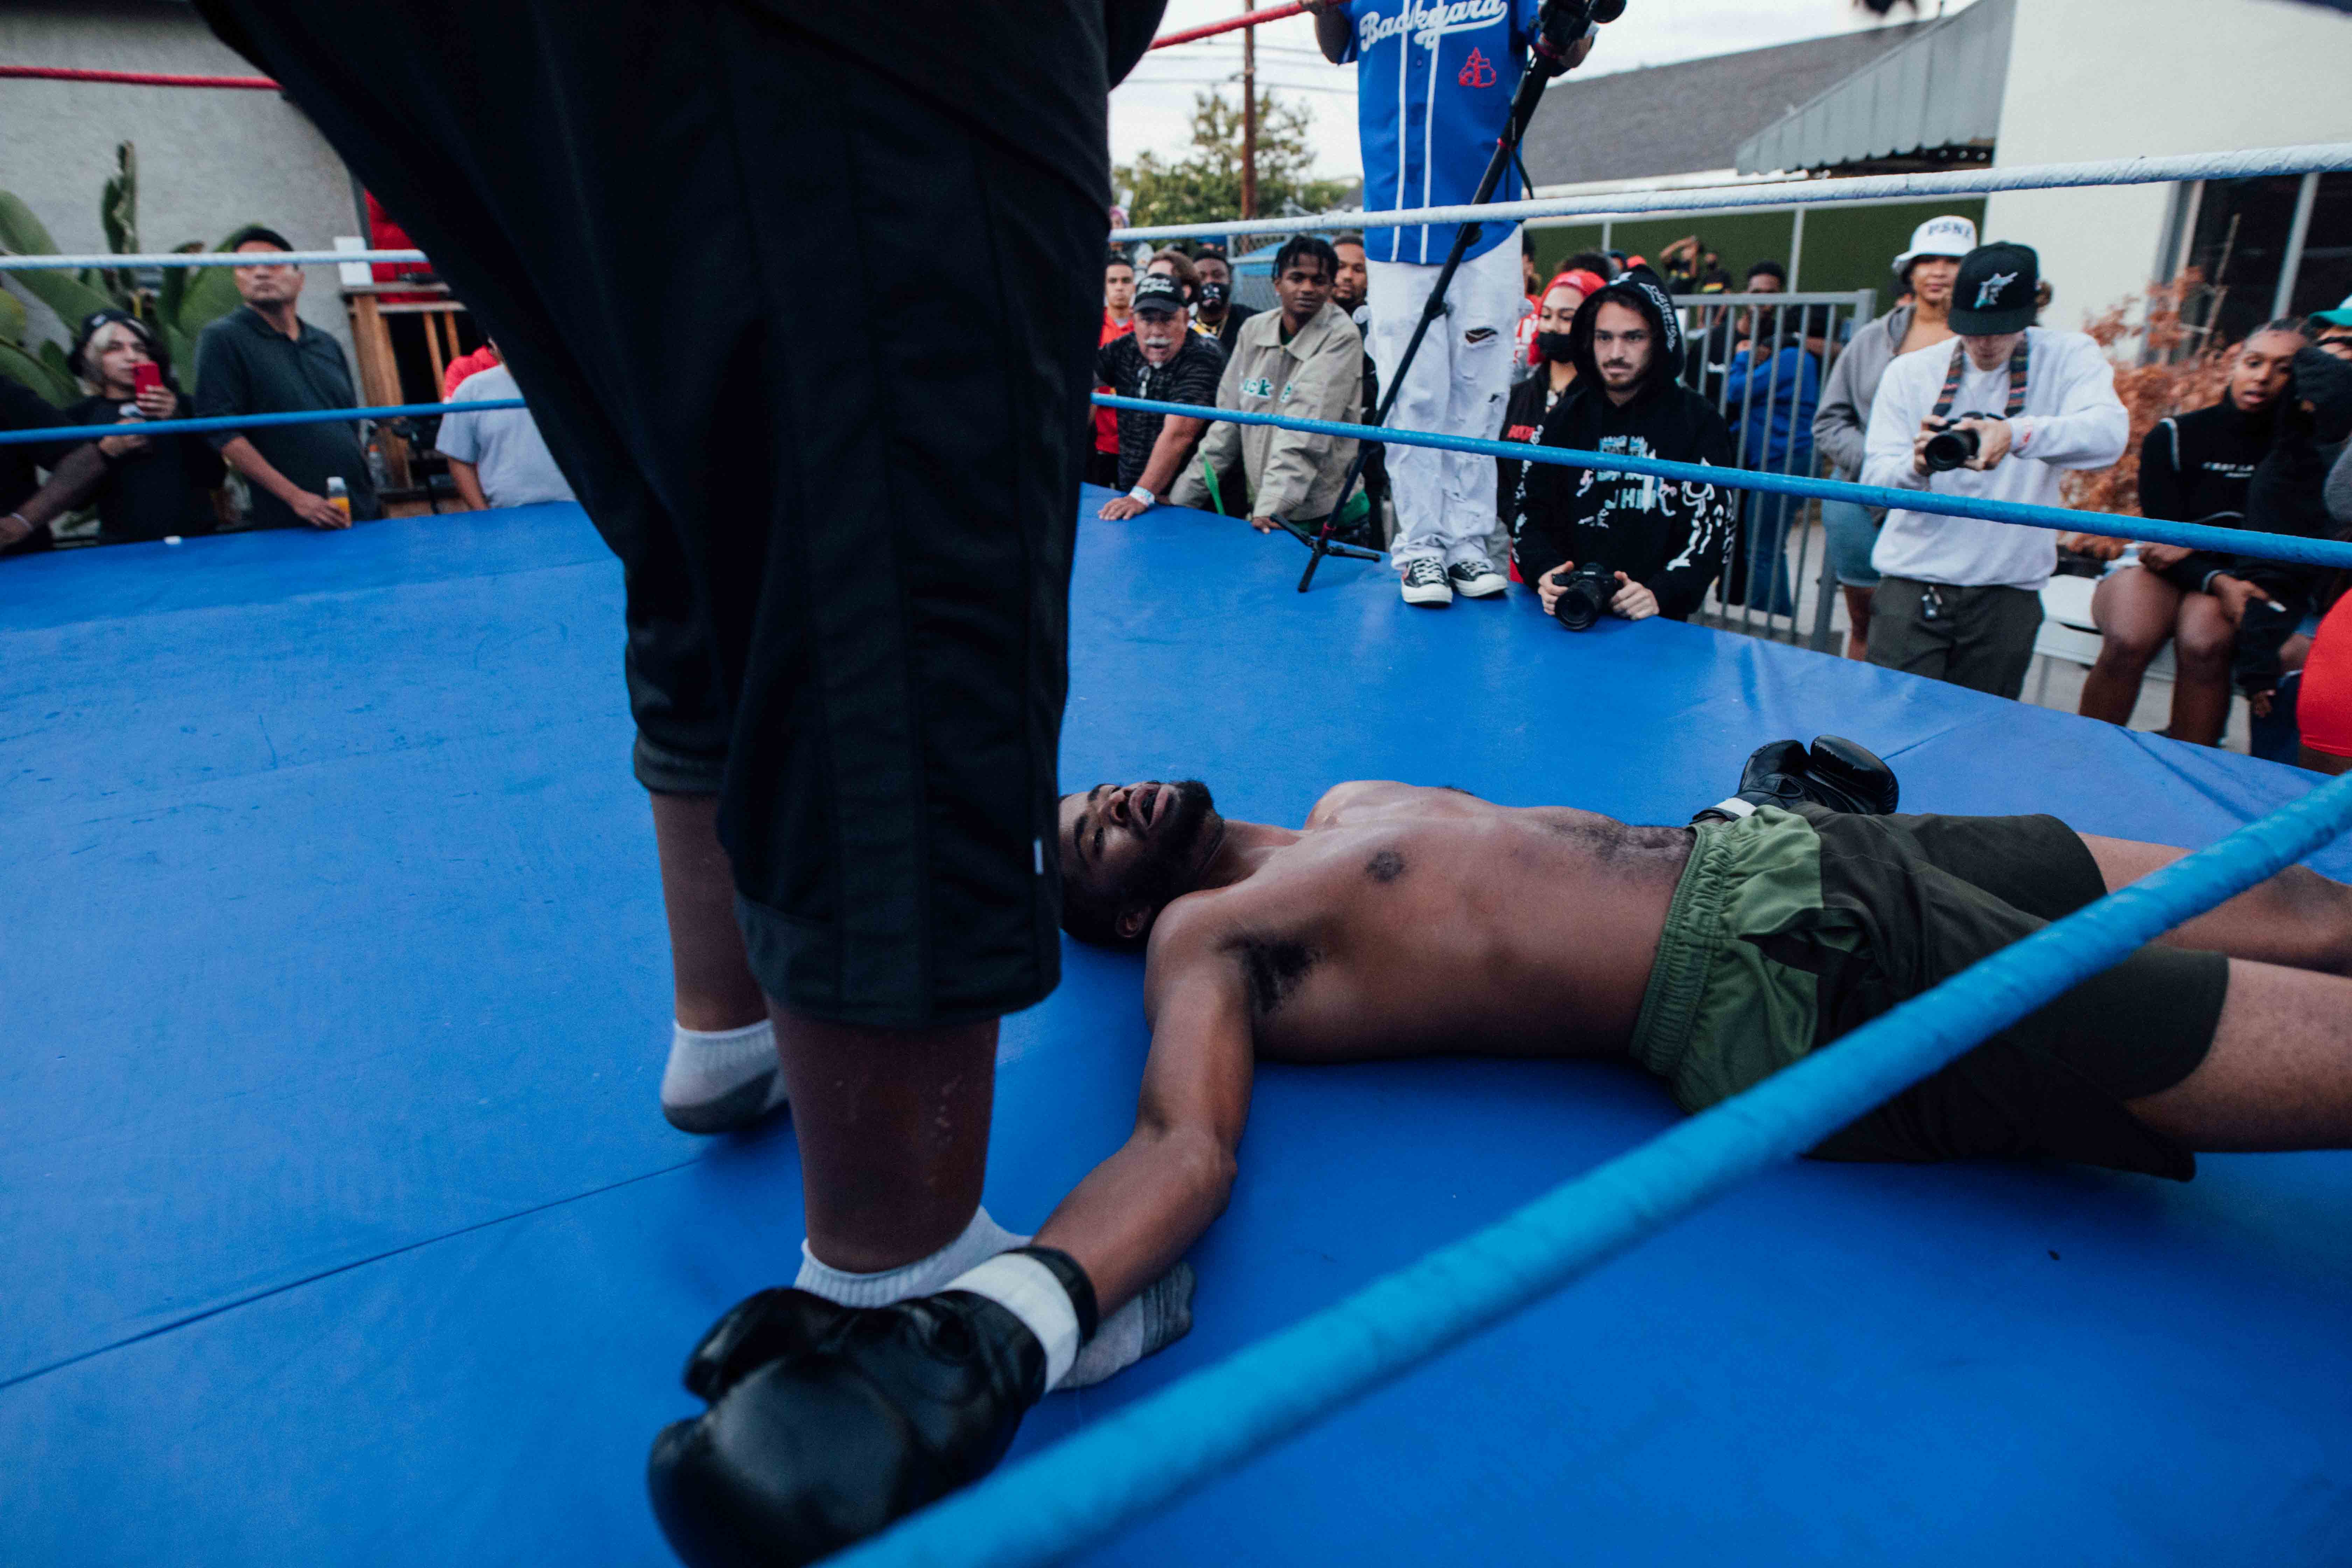 A fighter is knocked out during a match.